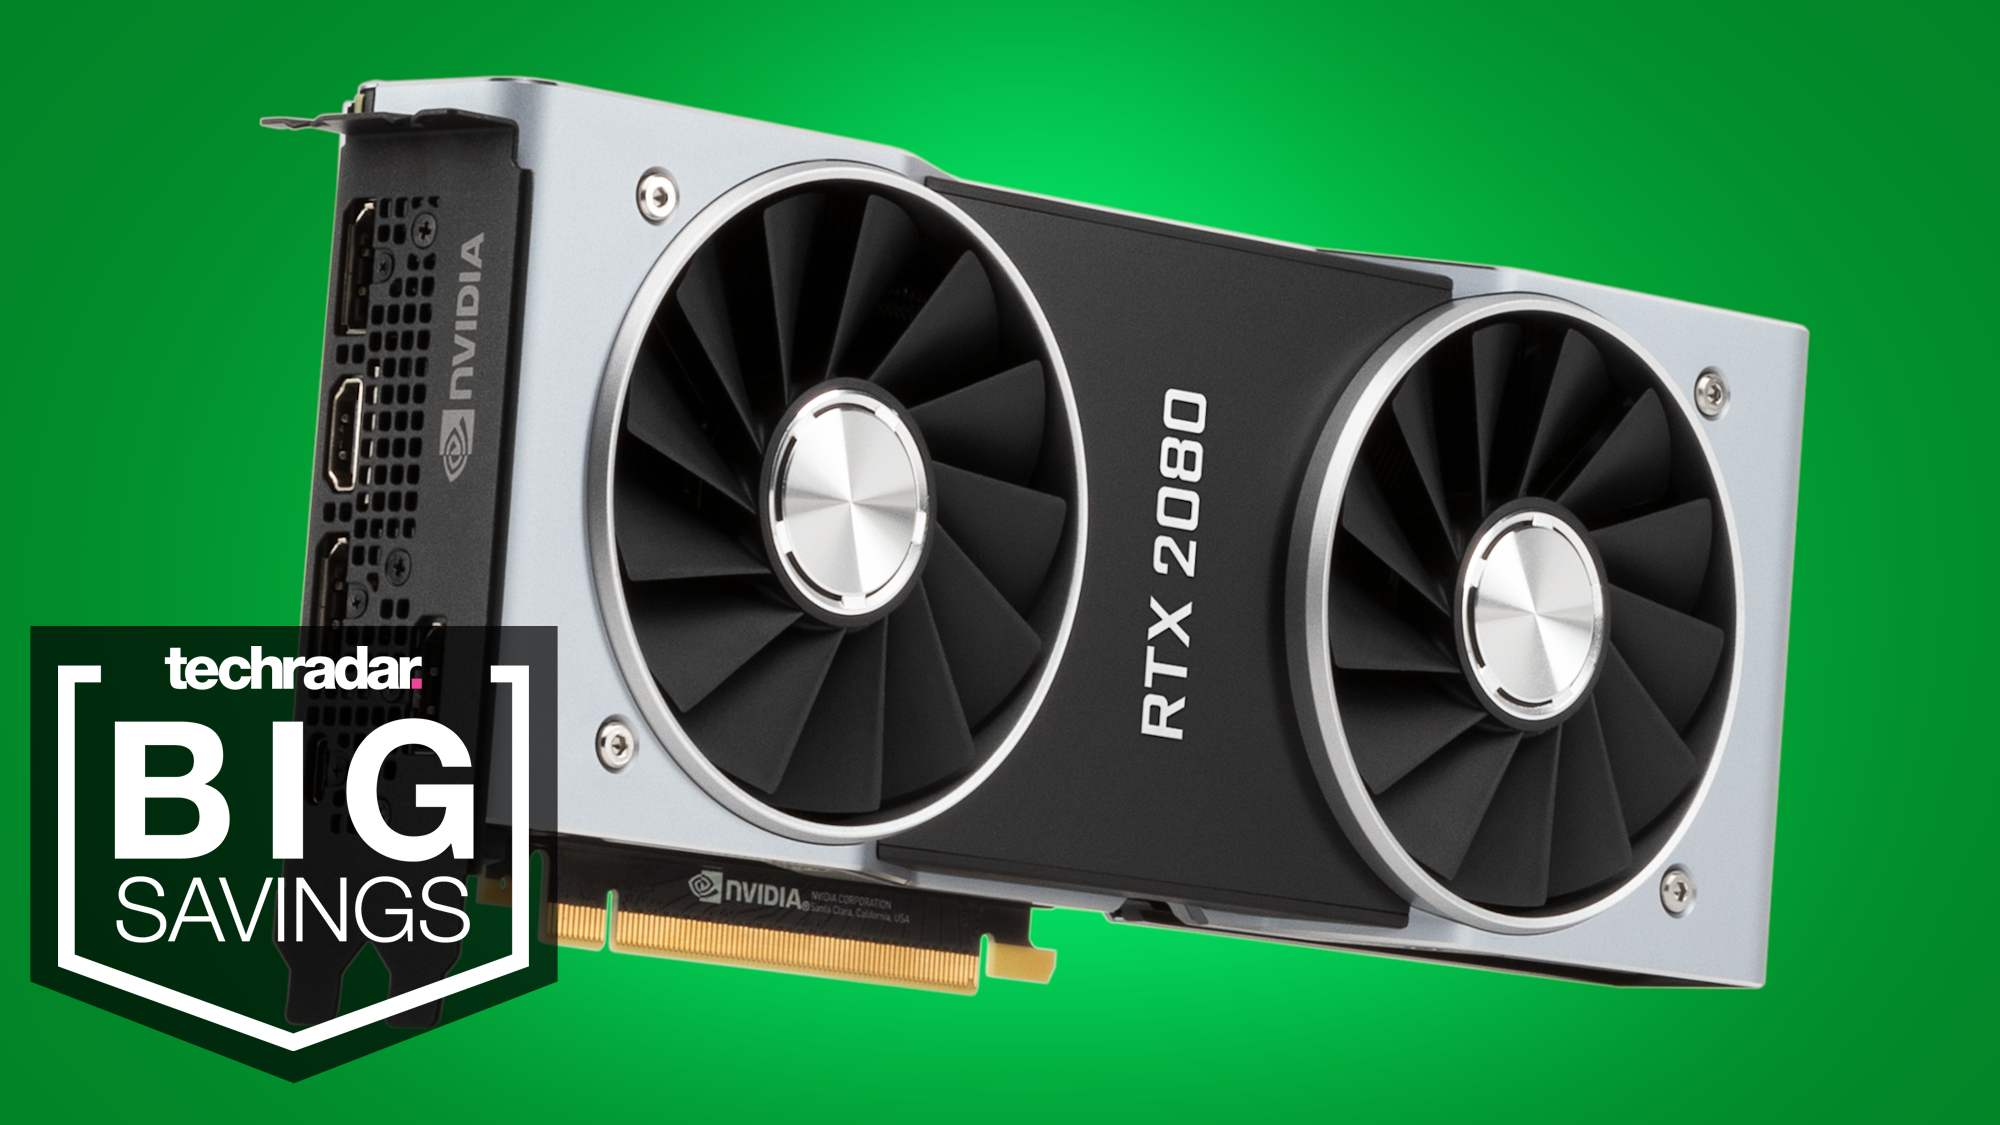 Nvidia Graphics Cards Are Getting Price Cuts Ahead Of Expected Rtx 3080 Launch Techradar